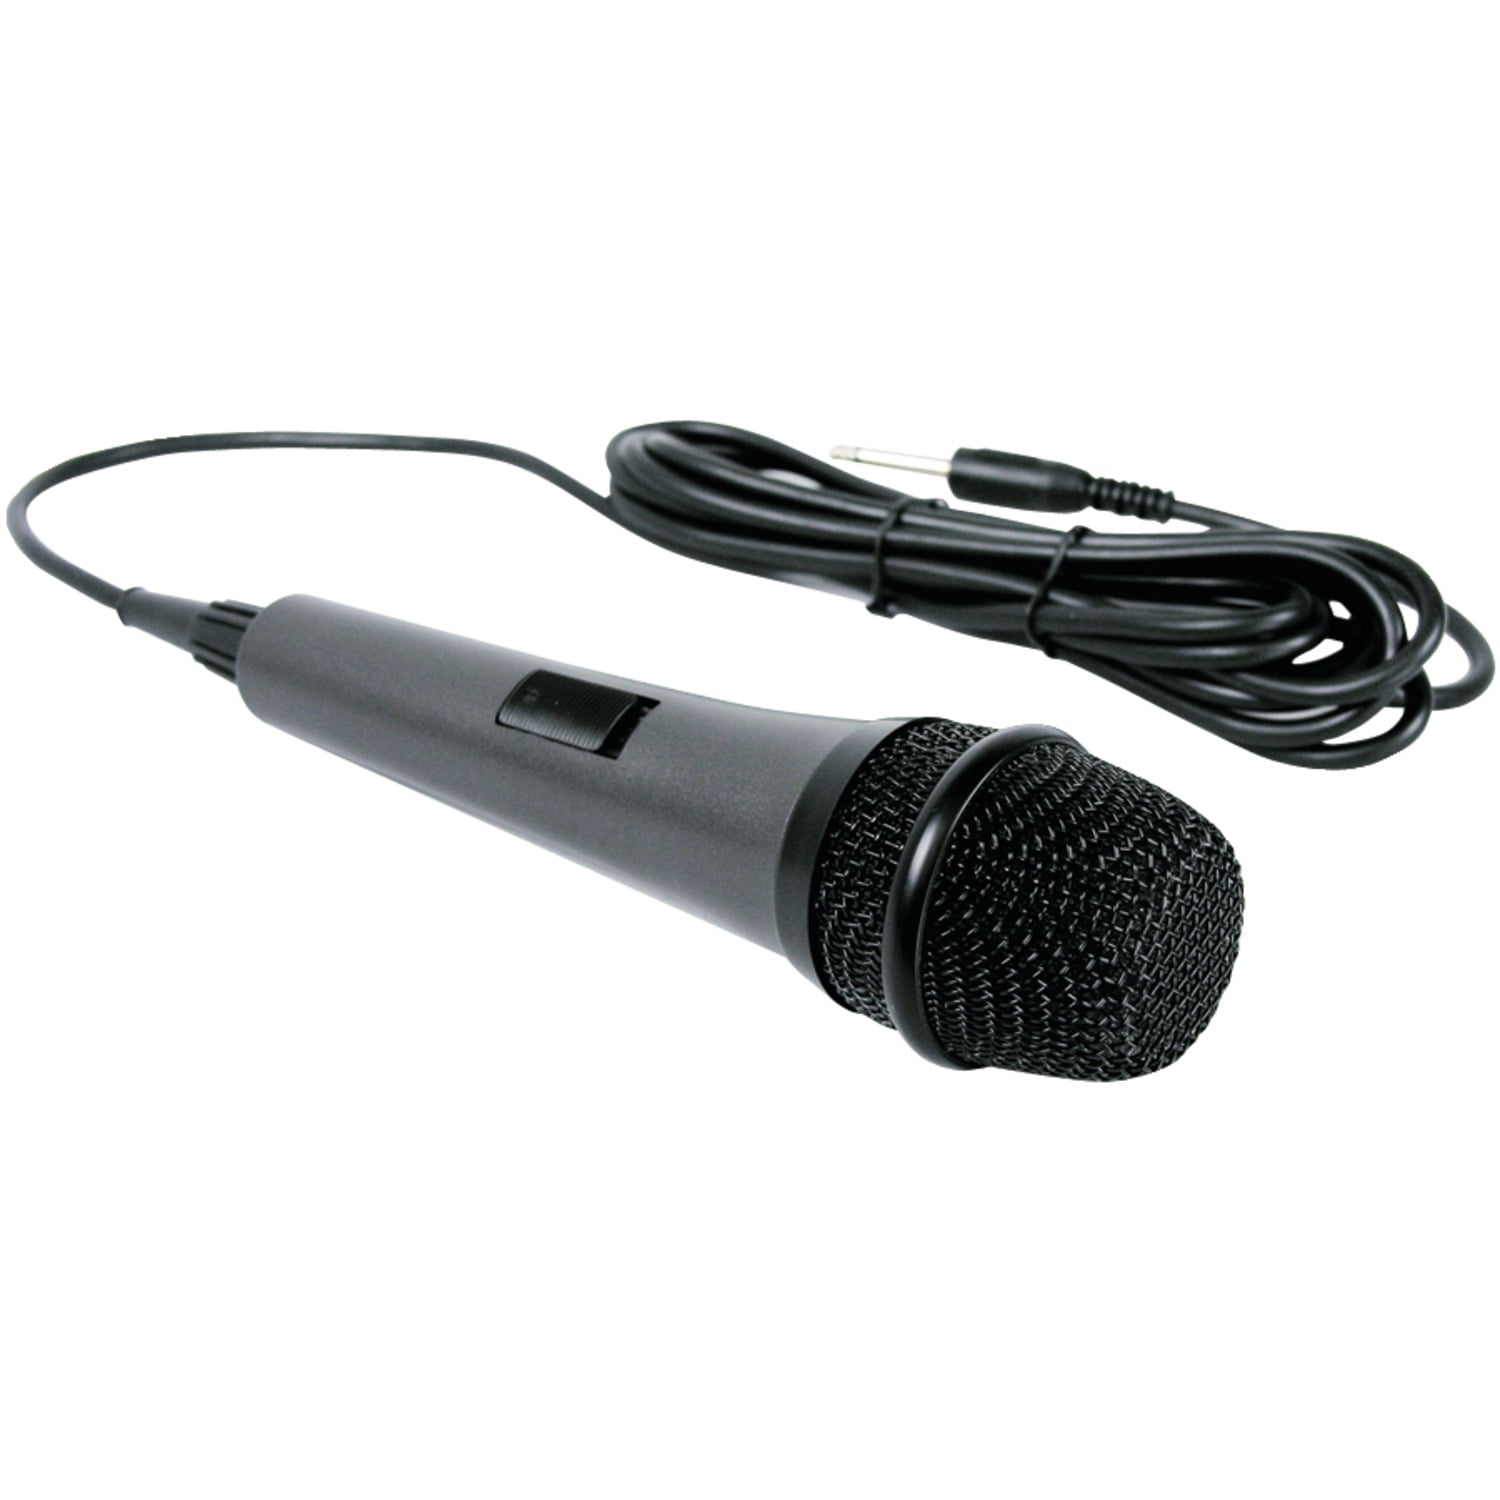 PM-66K 2 pcs Professional Microphone 2 Pack Audio Dynamic Cardiod Karaoke Singing Wired Mic Music Recording Karoke Microphone with 2X Cable Bundle 5 Core PM625 Ratings